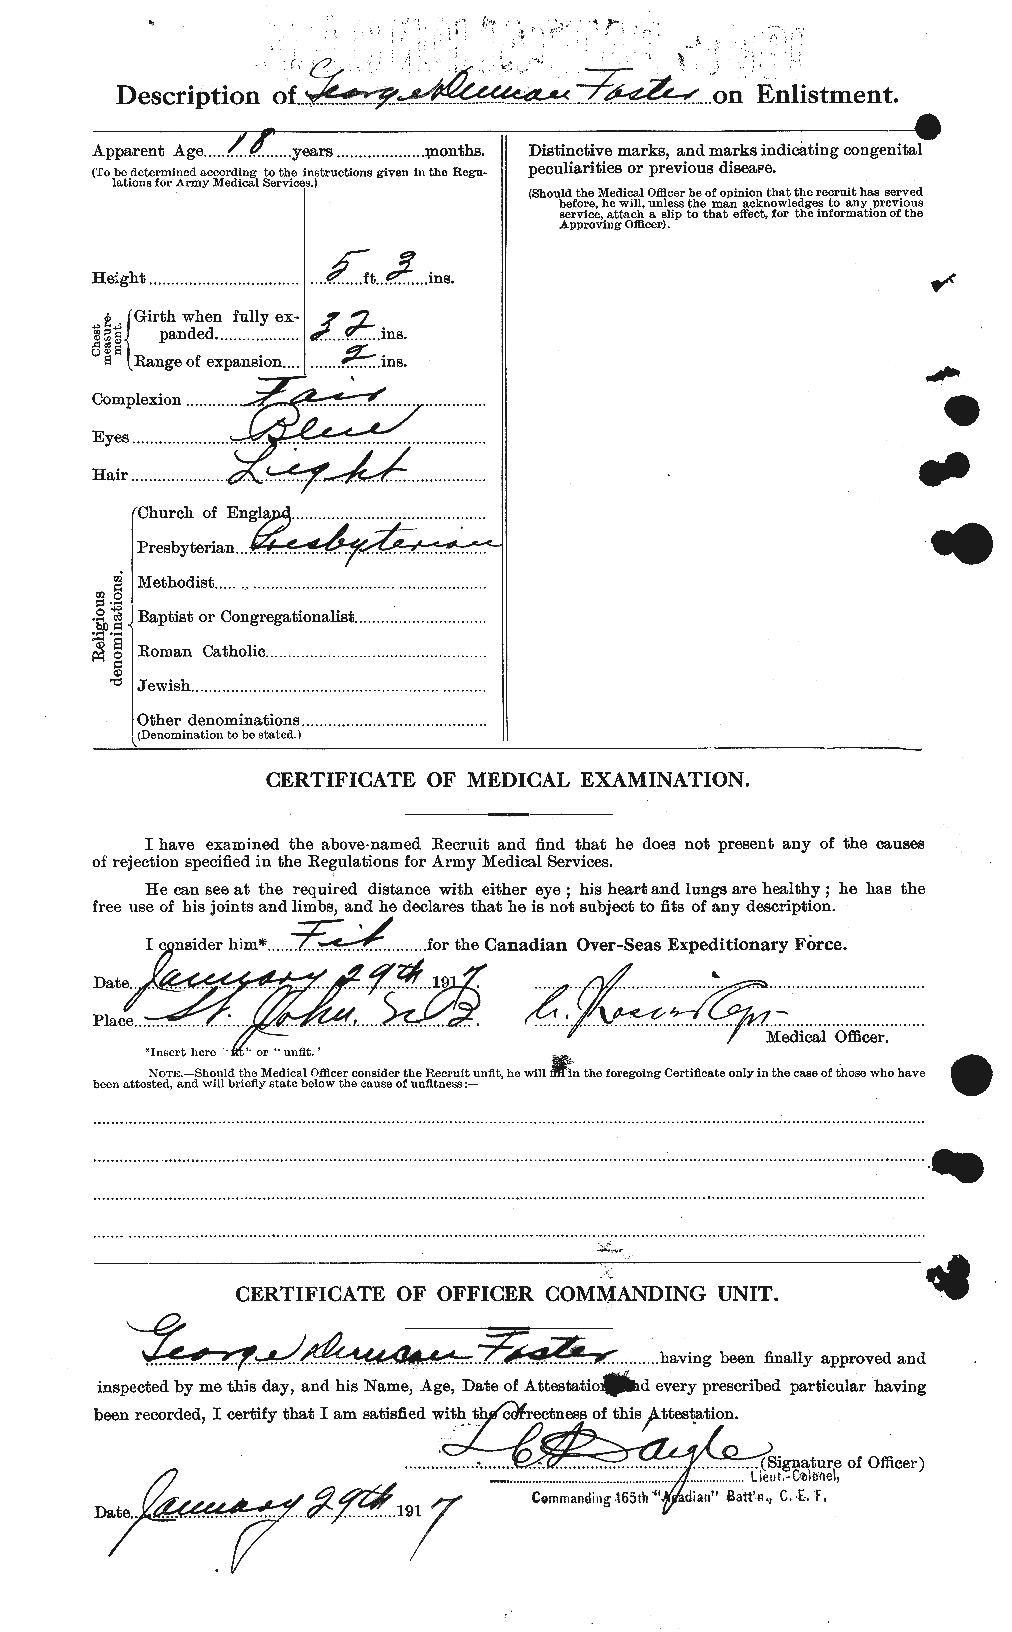 Personnel Records of the First World War - CEF 330685b